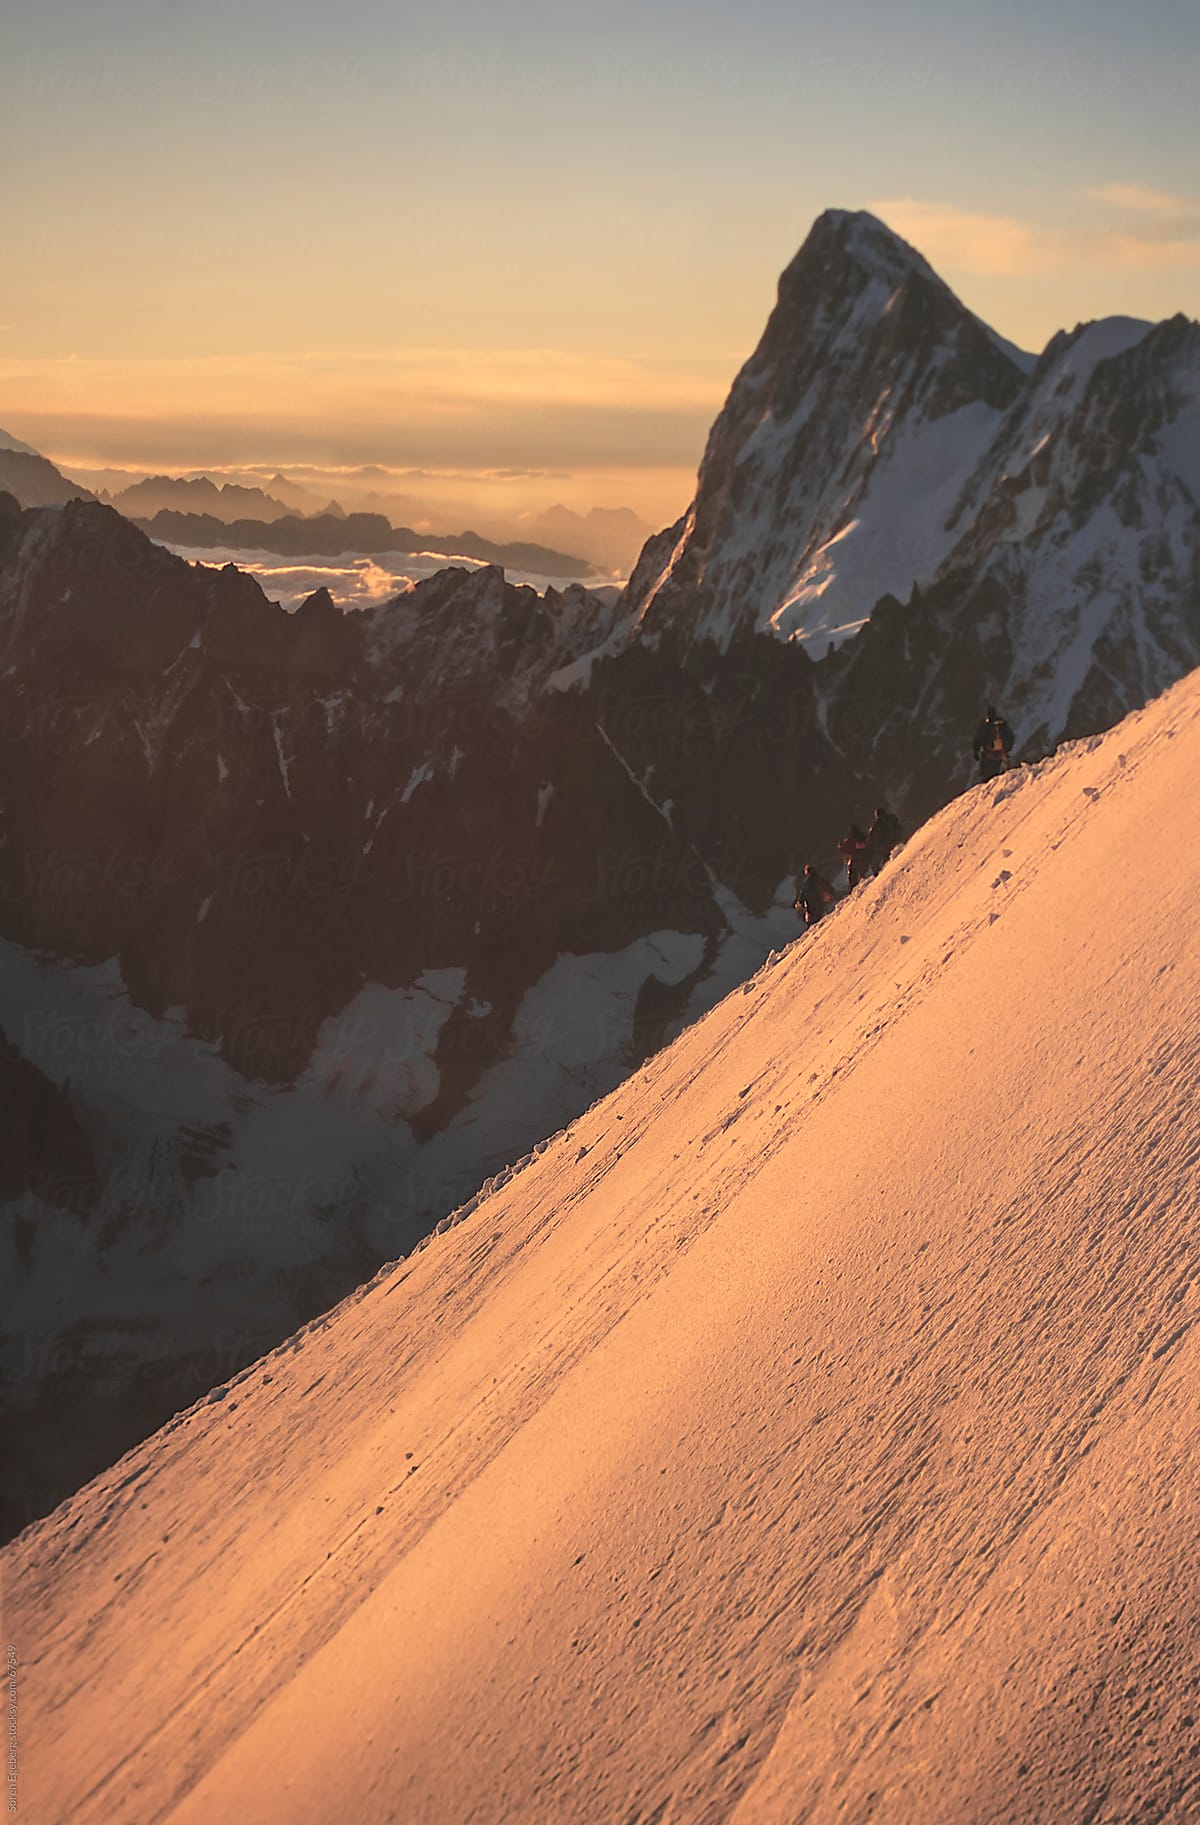 Mountain scenery with climbers descending snow ridge at sunrise